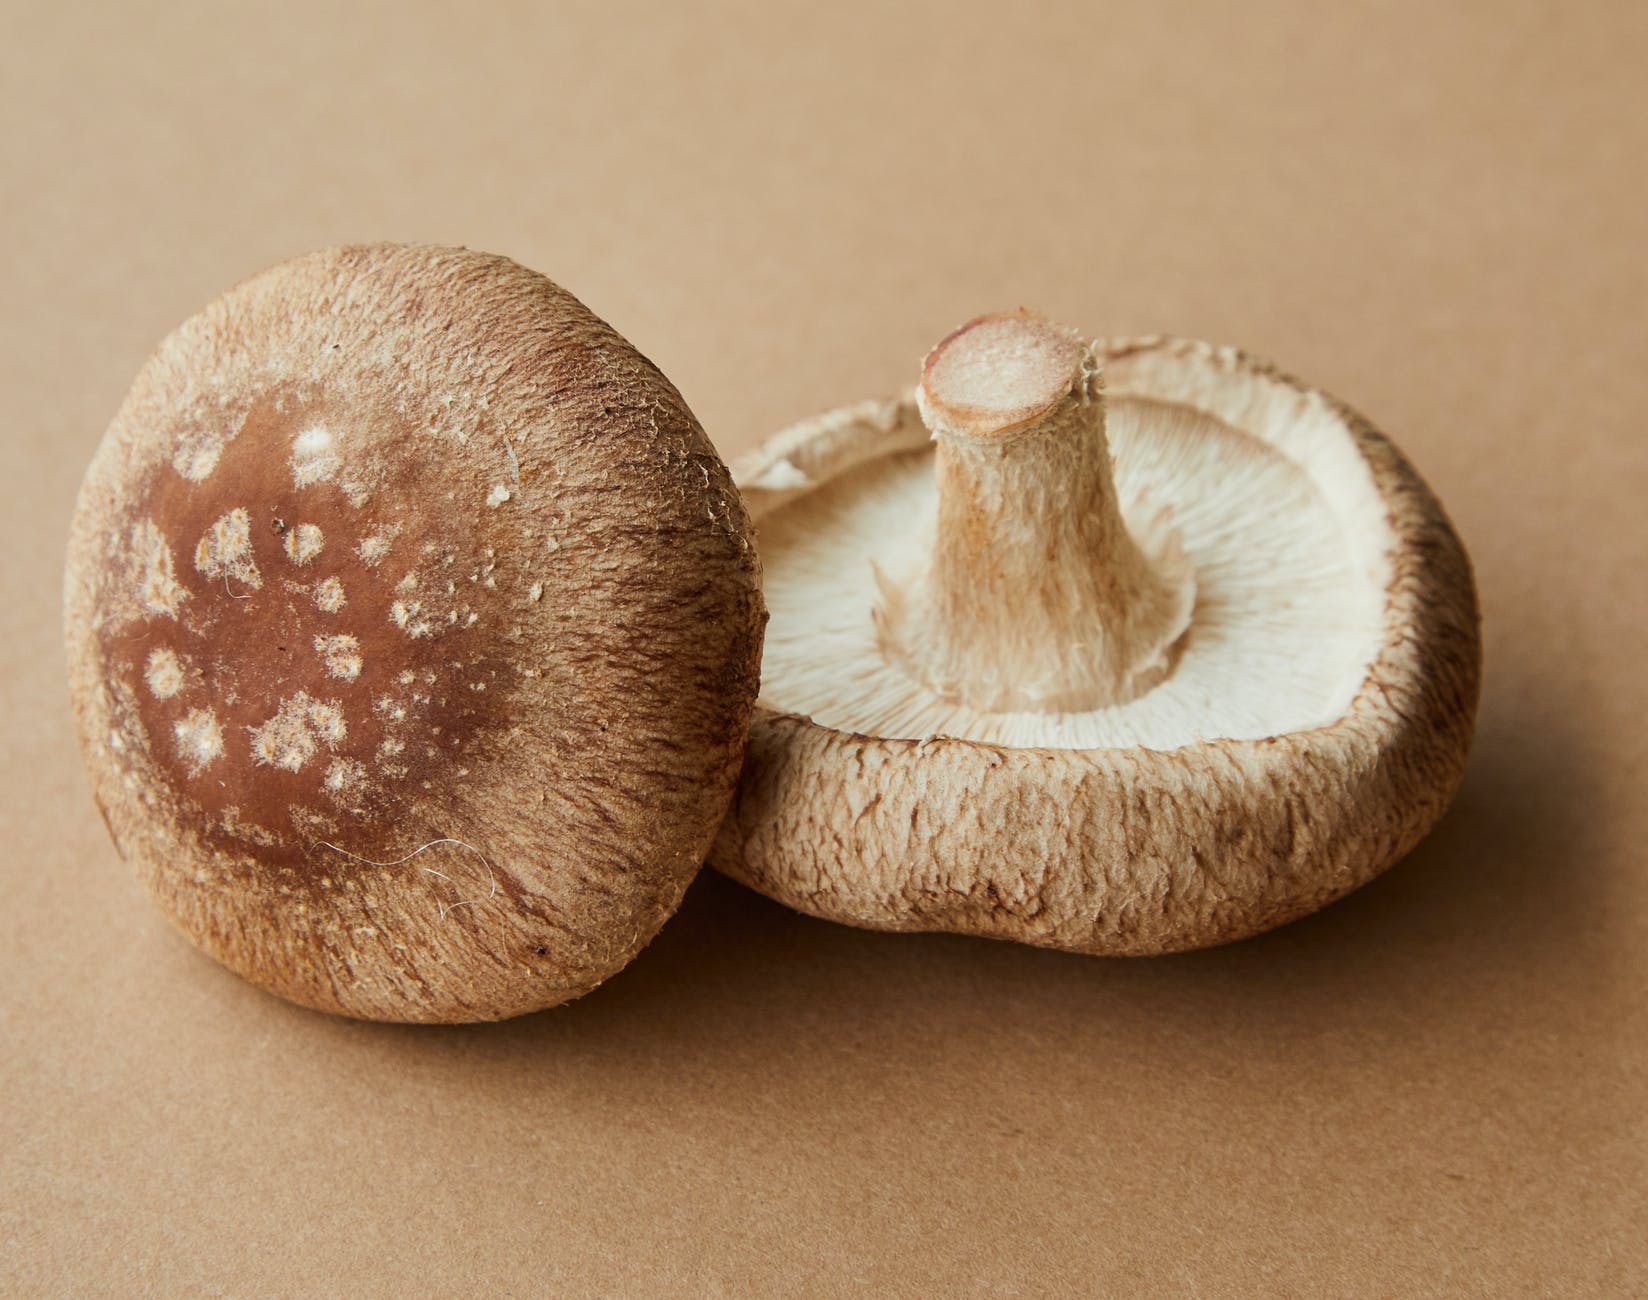 Is it safe for felines to eat fresh mushrooms?